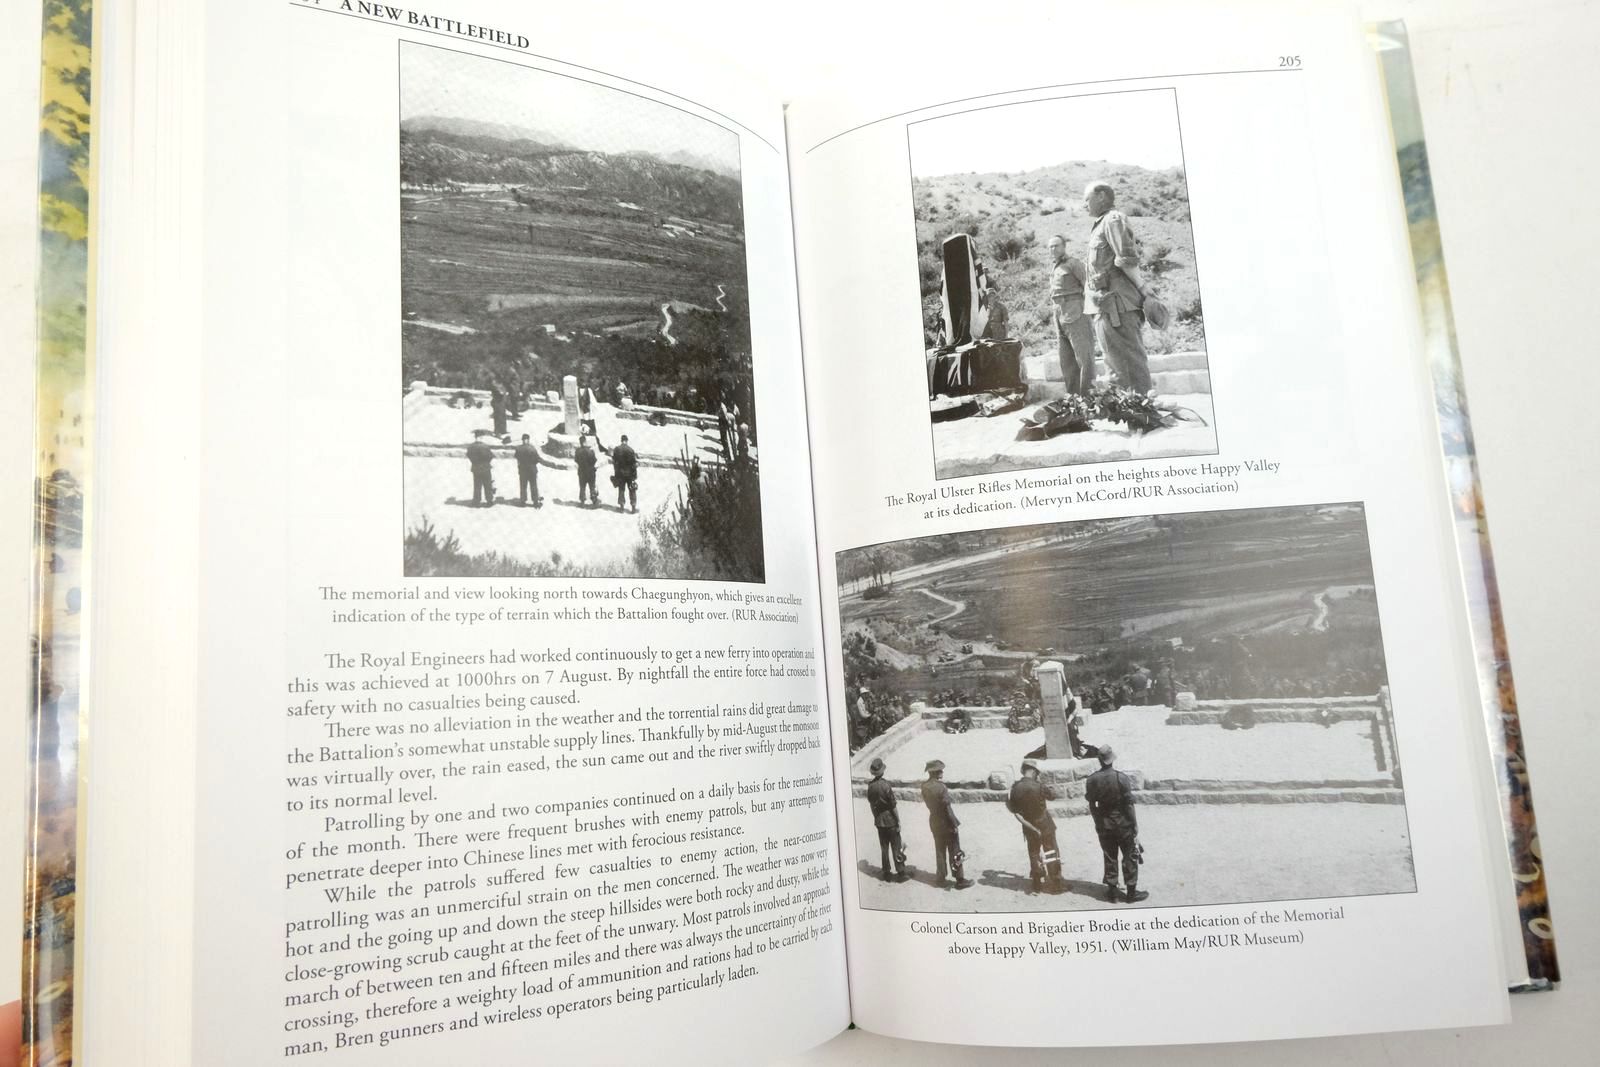 Photo of A NEW BATTLEFIELD: THE ROYAL ULSTER RIFLES IN KOREA 1950-51 written by Orr, David R.
Truesdale, David published by Helion & Company (STOCK CODE: 2138079)  for sale by Stella & Rose's Books